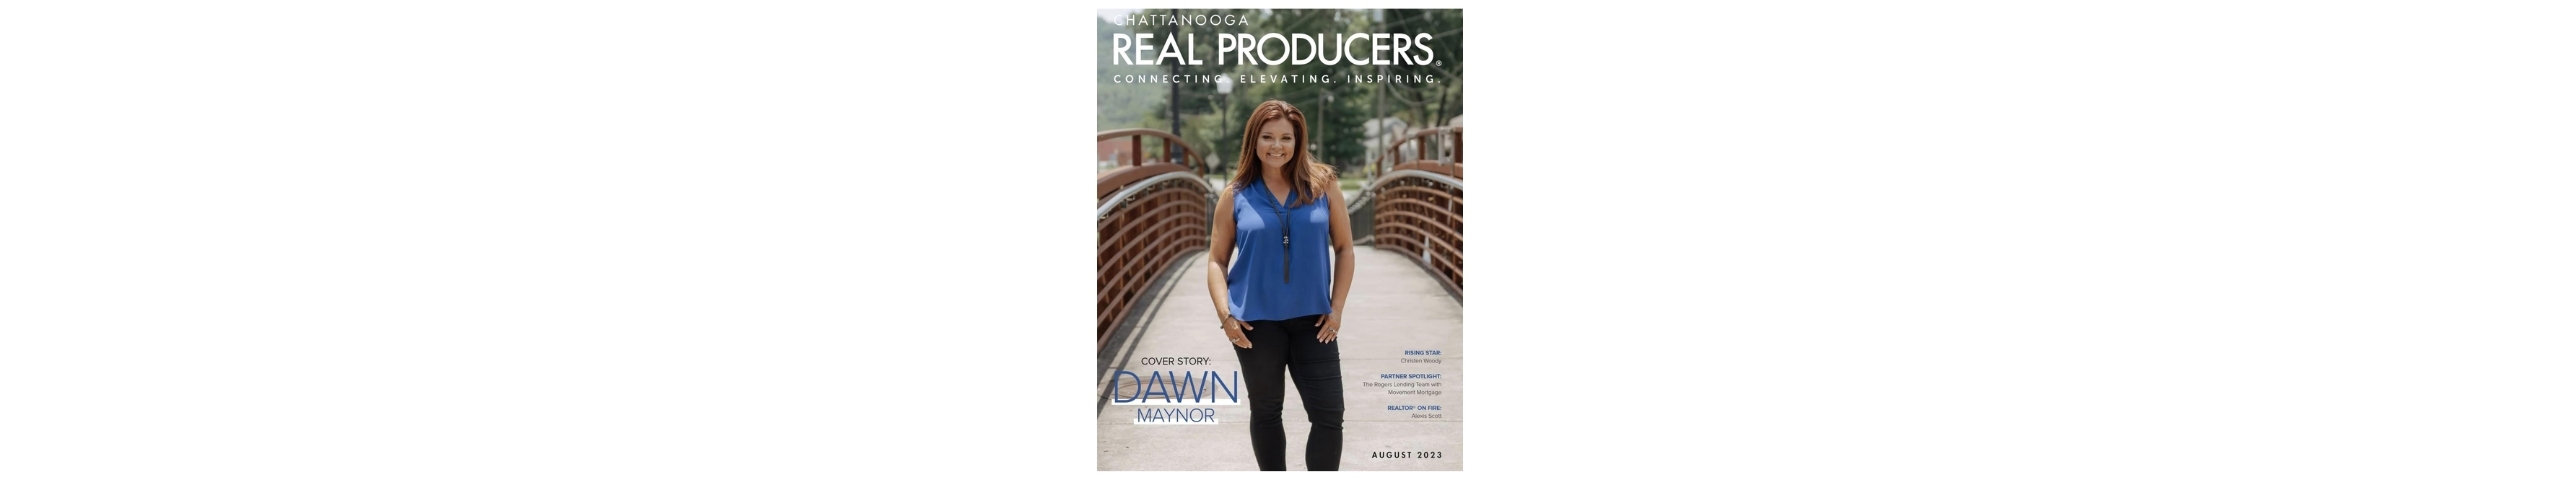 Dawn Maynor Real Producers Cover